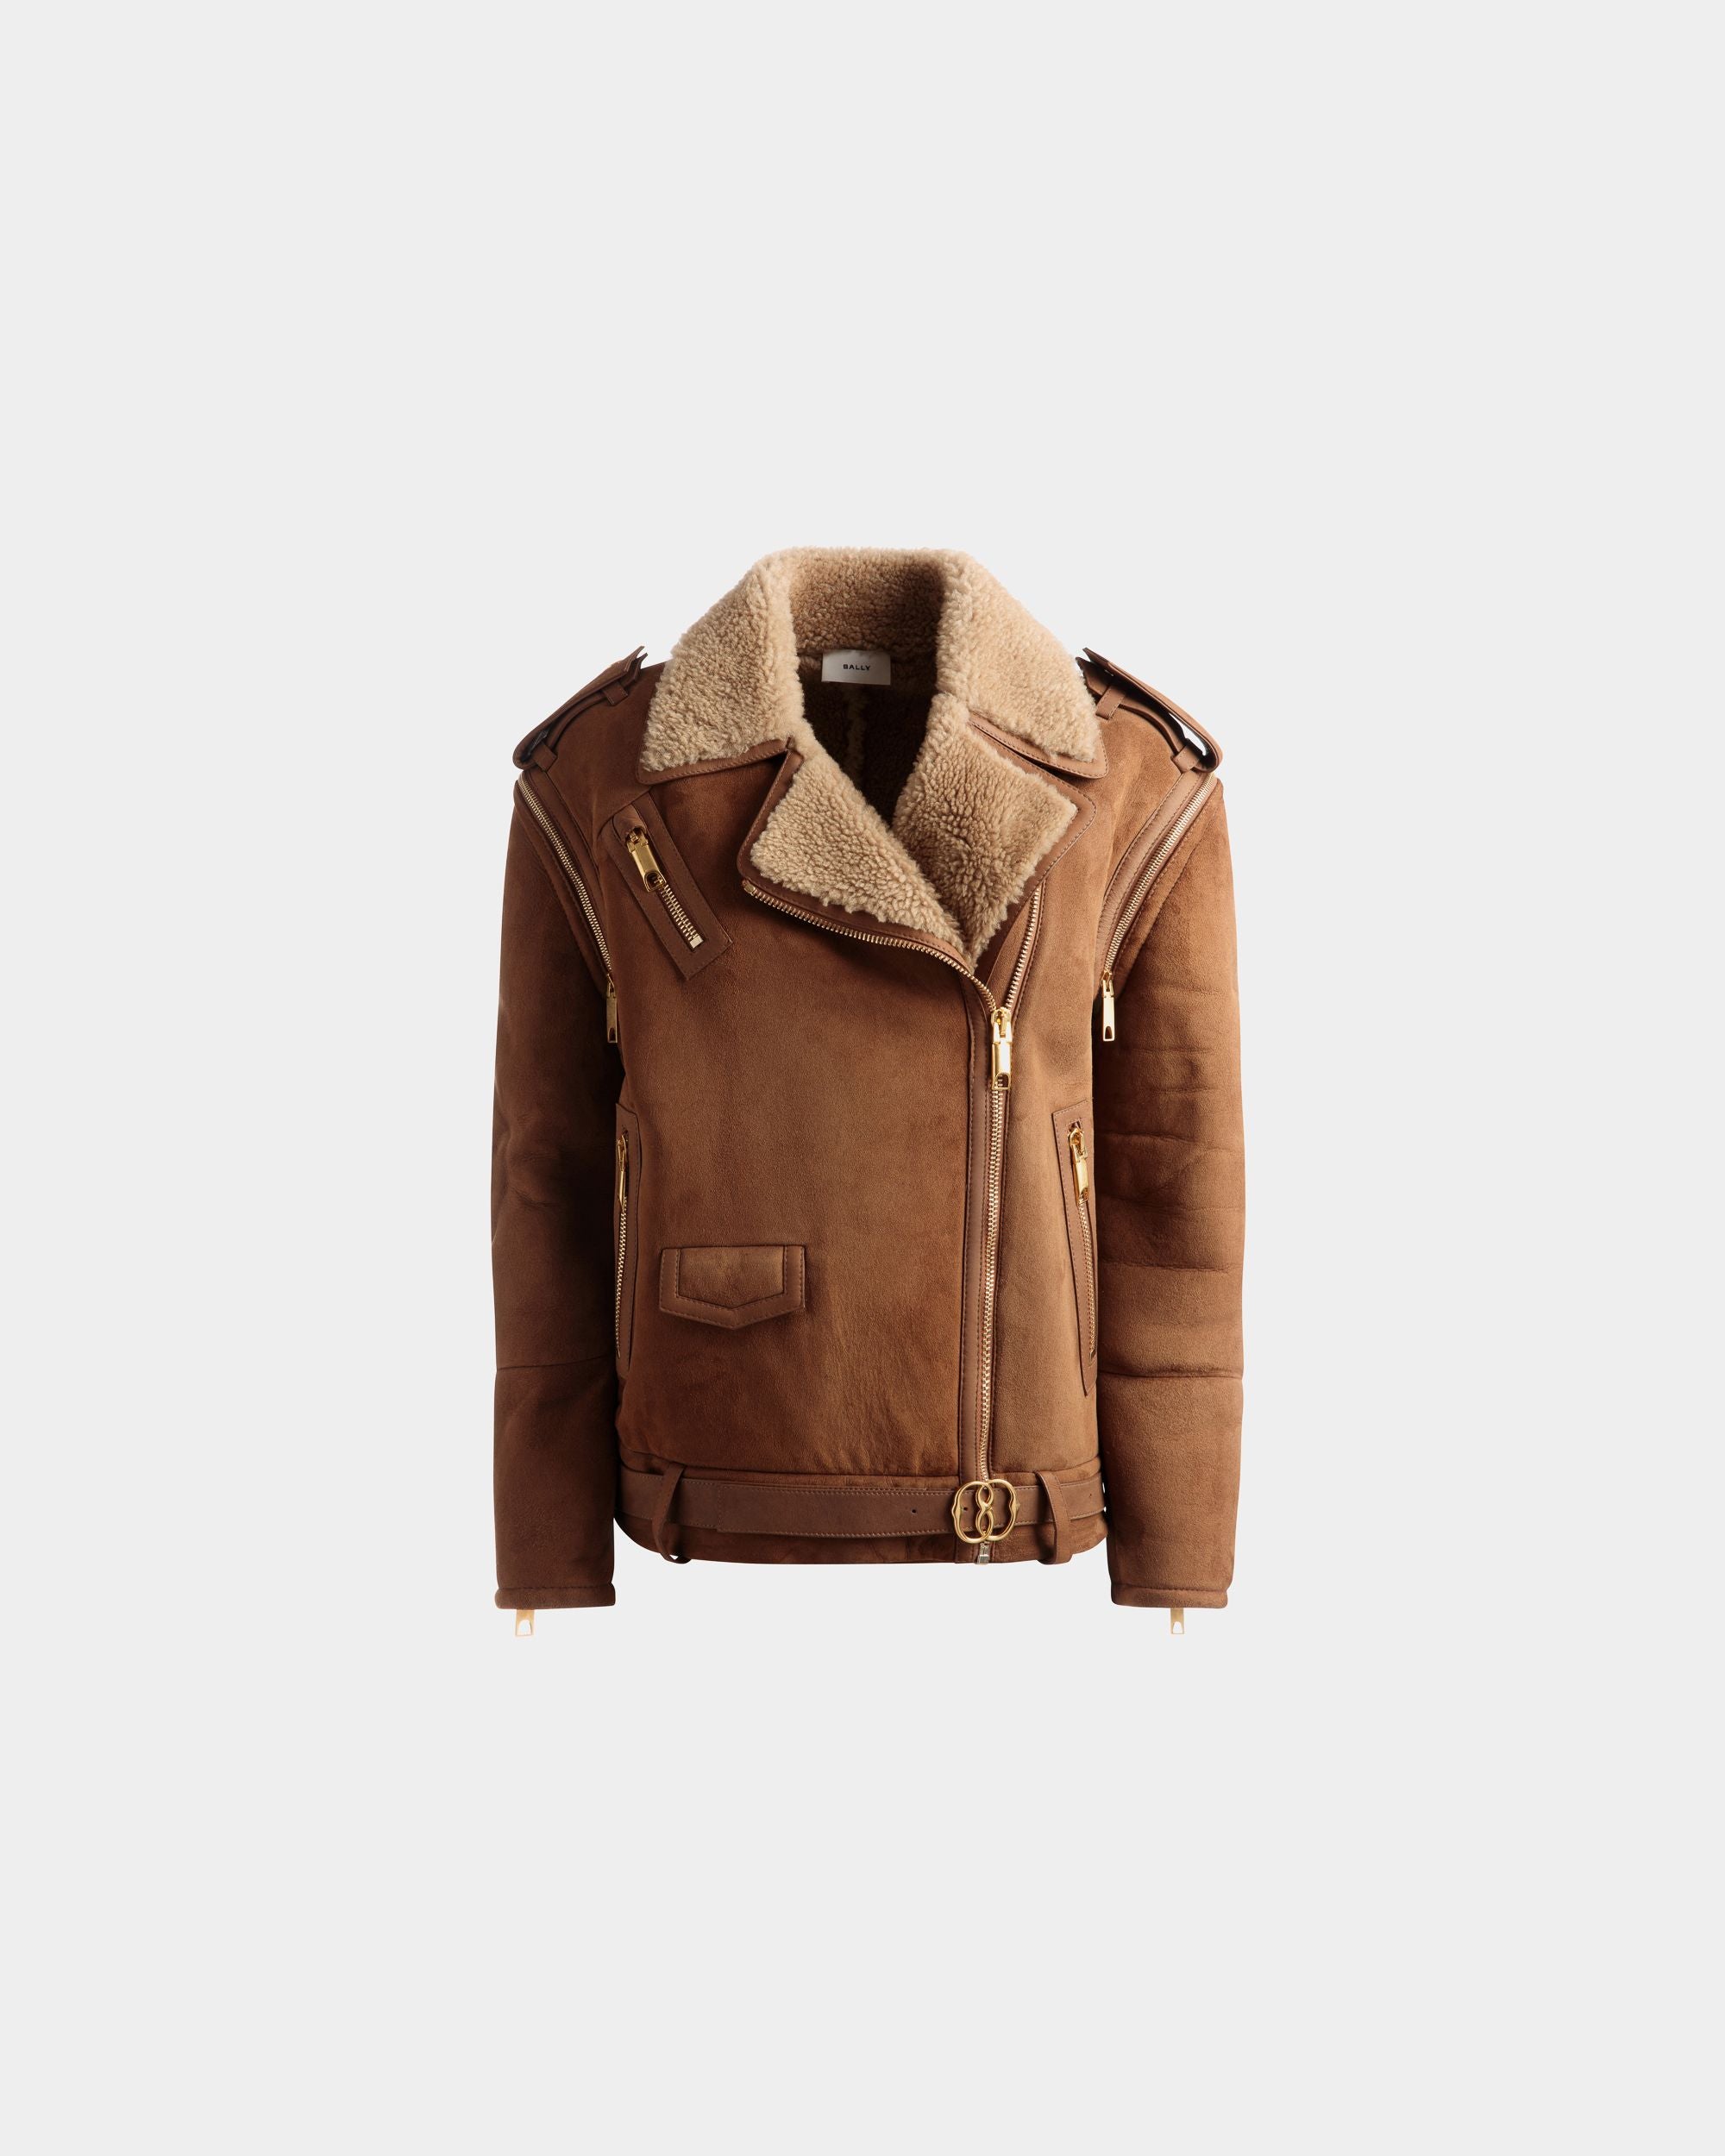 Women's Double-Breasted Shearling Jacket In Brown Suede | Bally | Still Life Front